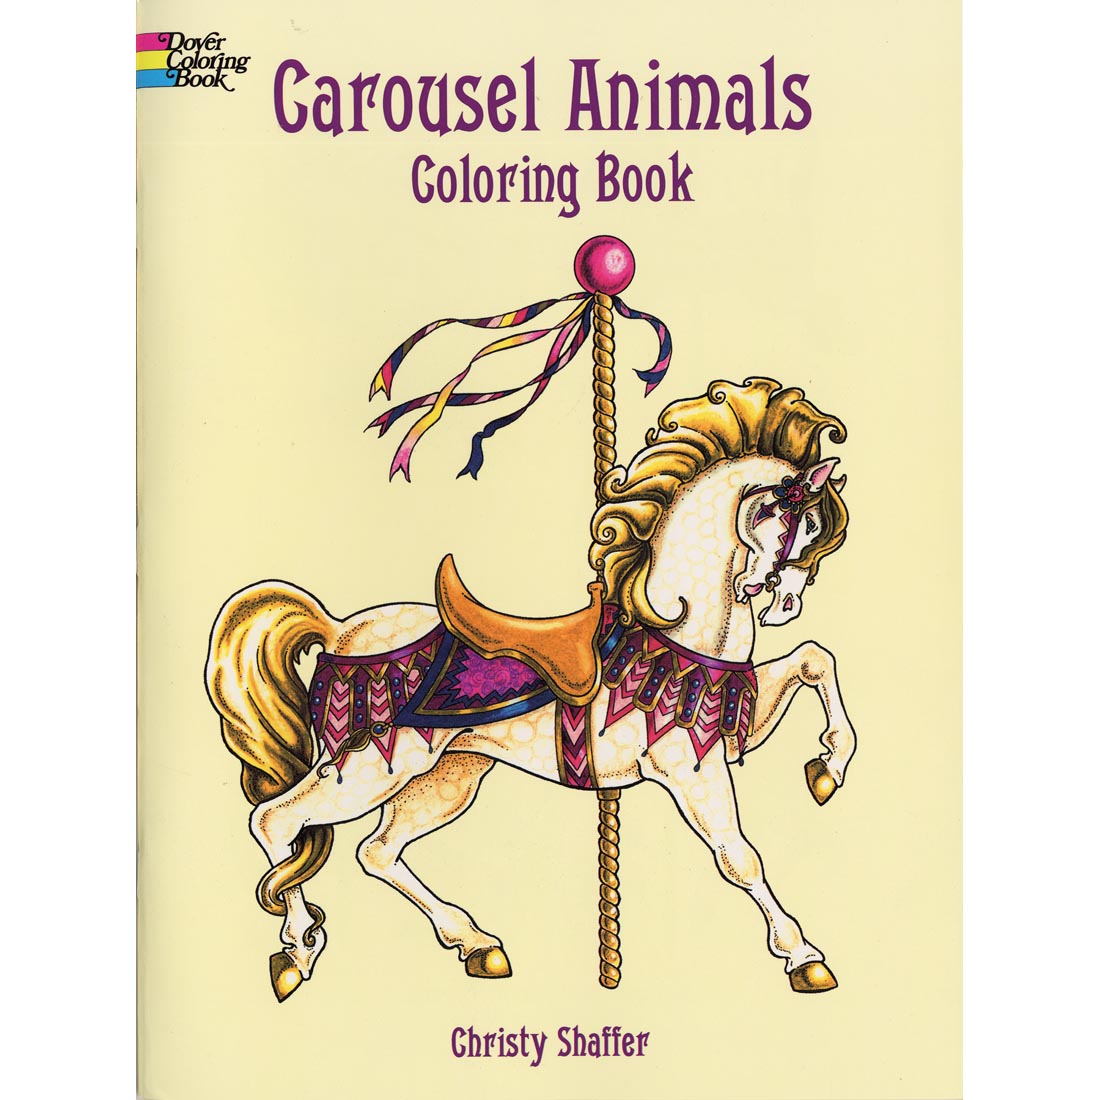 Carousel Animals Coloring Book by Dover